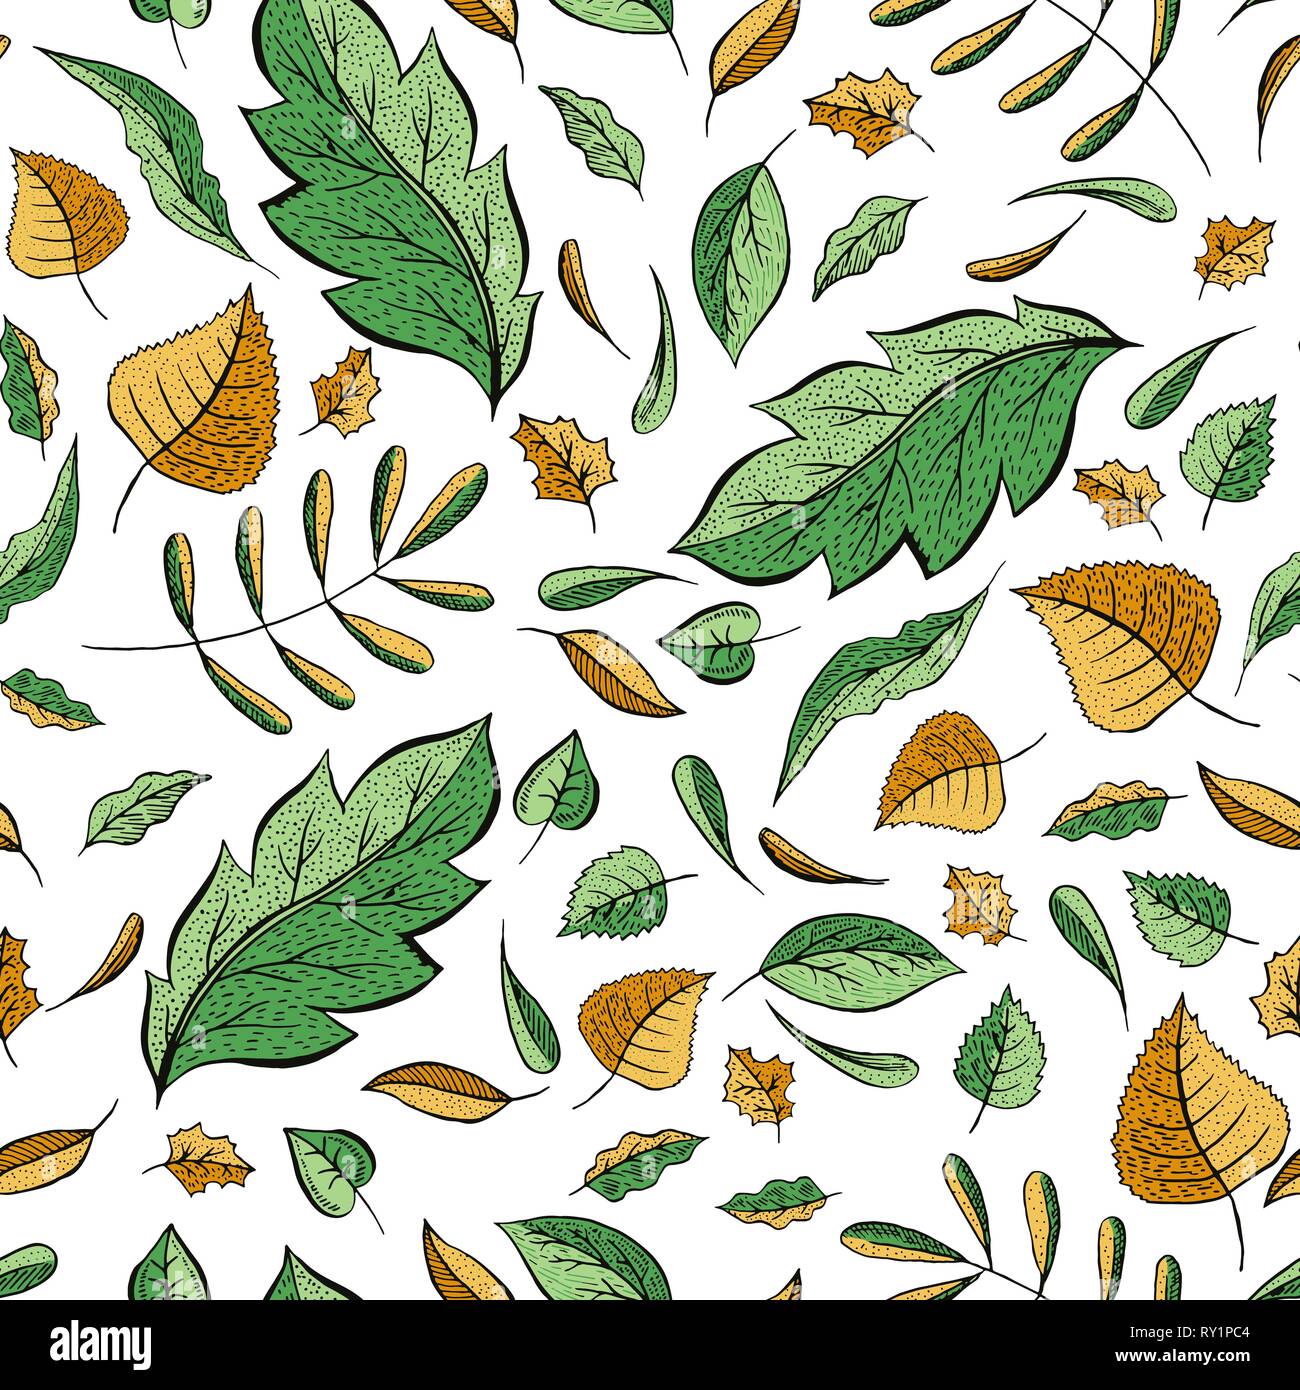 Autumn leaves hand drawn color seamless pattern. Oak, birch, walnut trees foliage vector illustration. Fresh green, autumnal yellow doodle leafage. Botanical wallpaper, textile, wrapping paper design Stock Vector